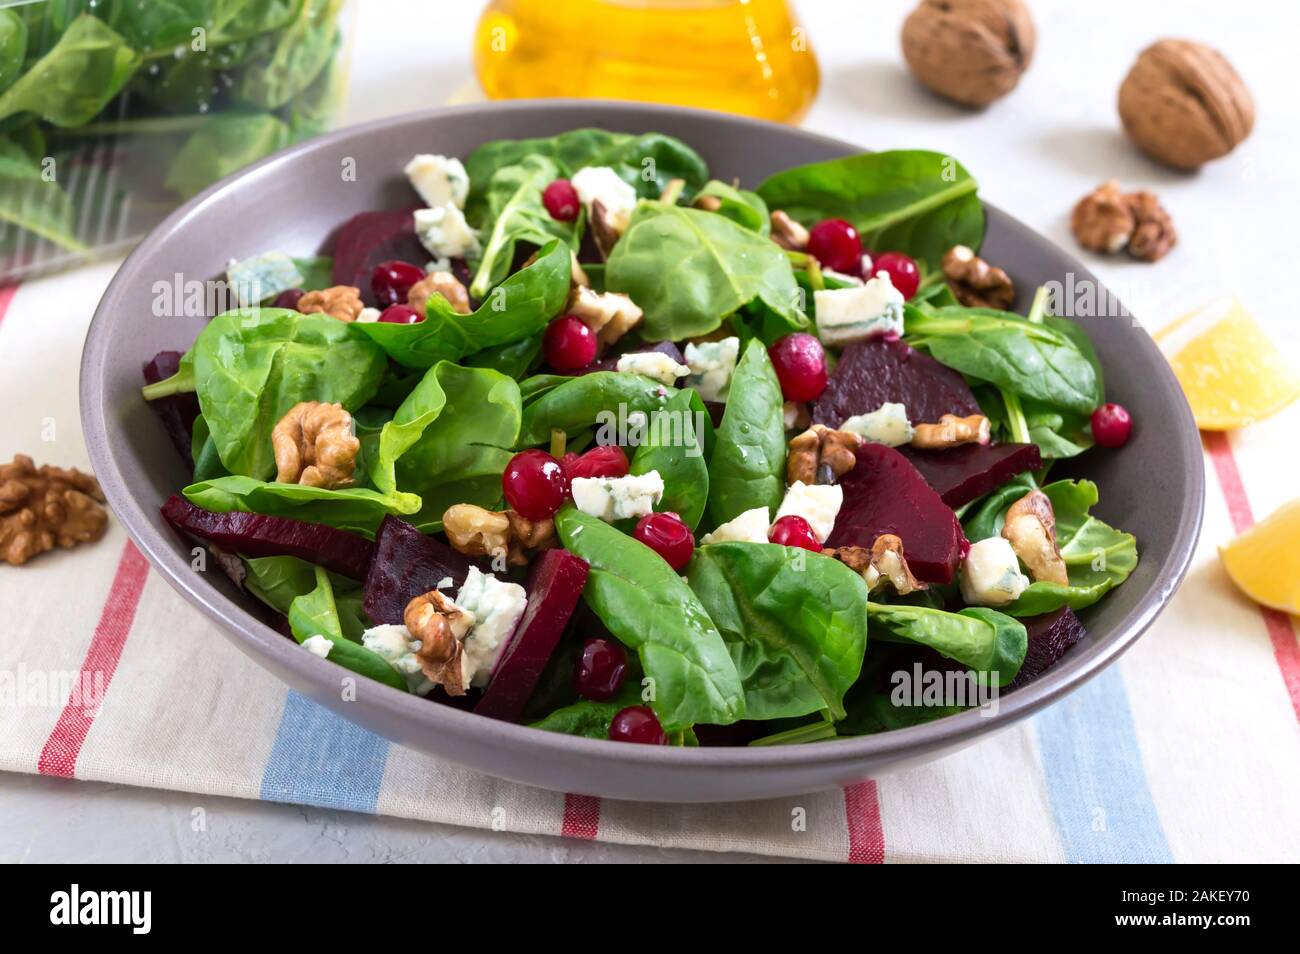 Salad with young spinach, boiled beets, blue cheese, nuts, cranberries in a bowl on a light background. Tasty diet fitness dish. Vitamin salad. Proper Stock Photo